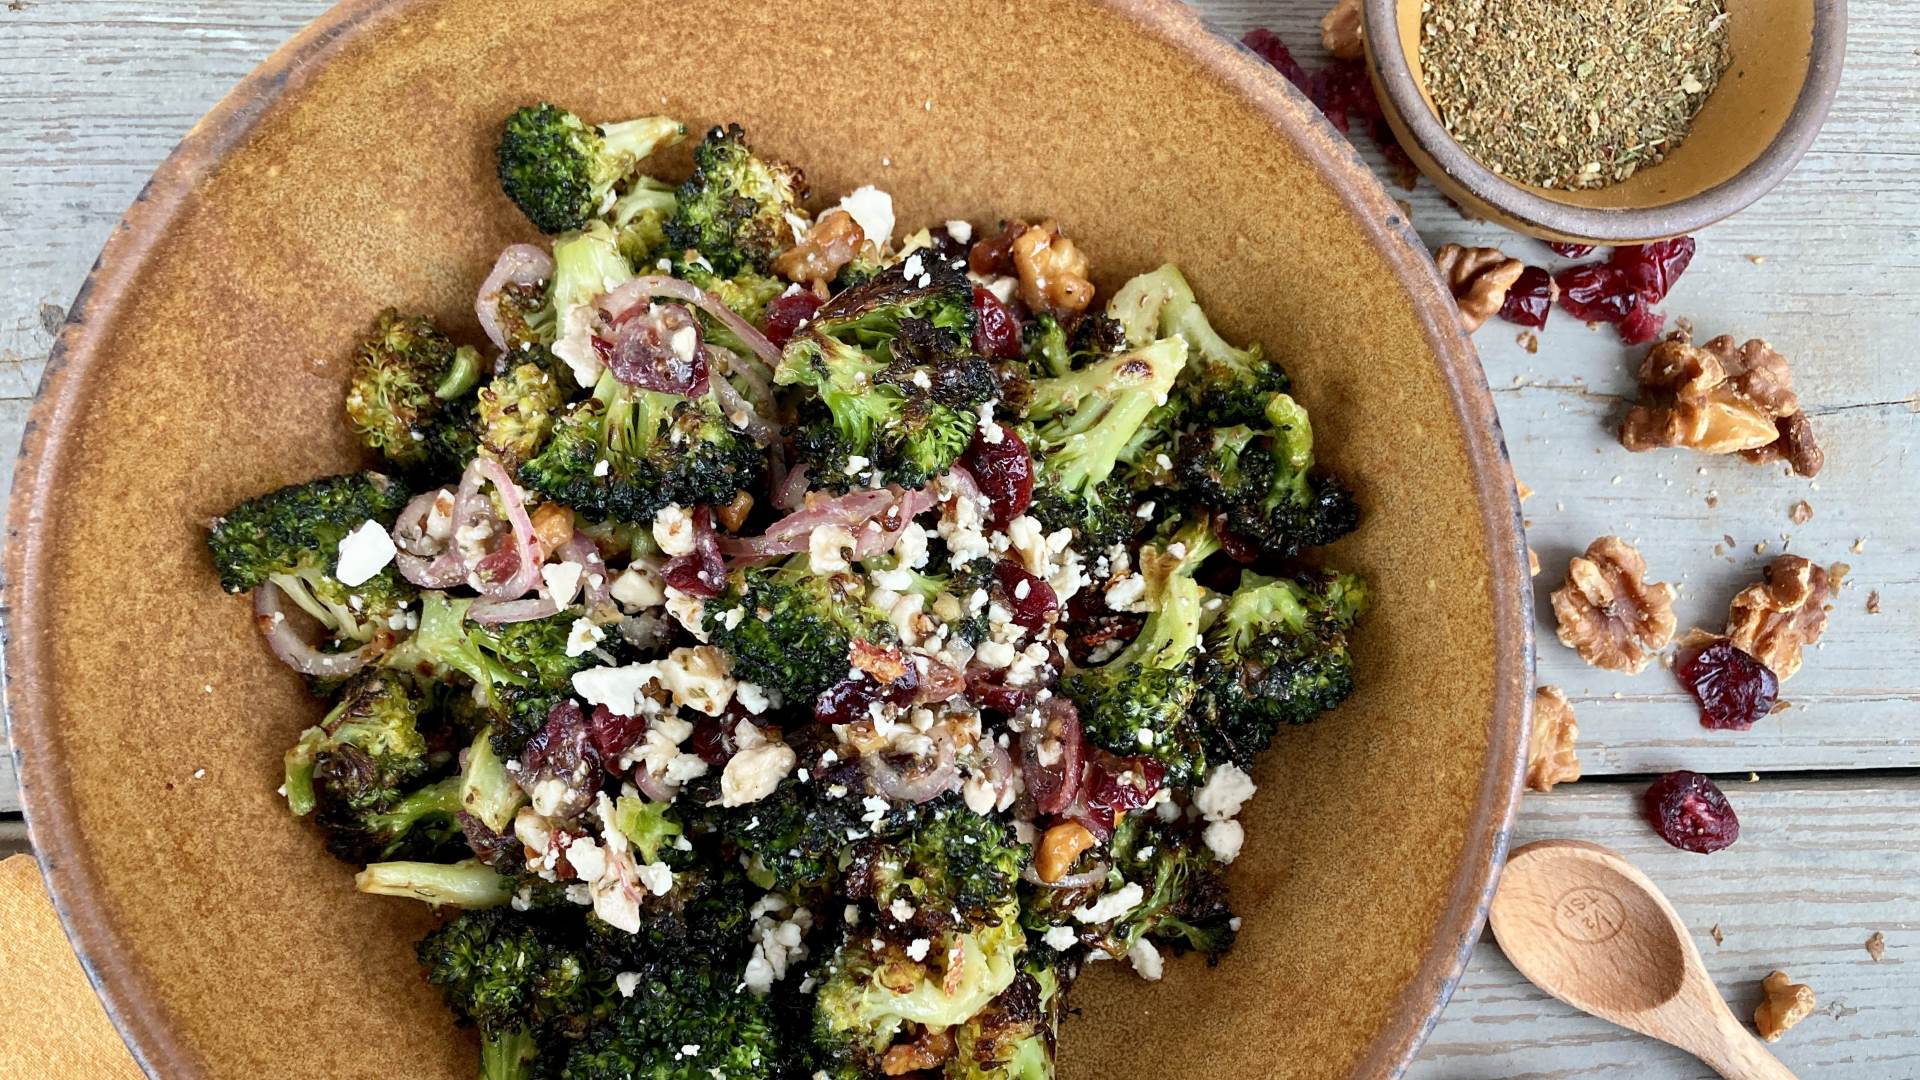 A brown ceramic bowl of Roasted Broccoli Salad on a wooden background with toasted nuts, dried cranberries, and a bowl of Wild Green Goddess Seasoning next to it.